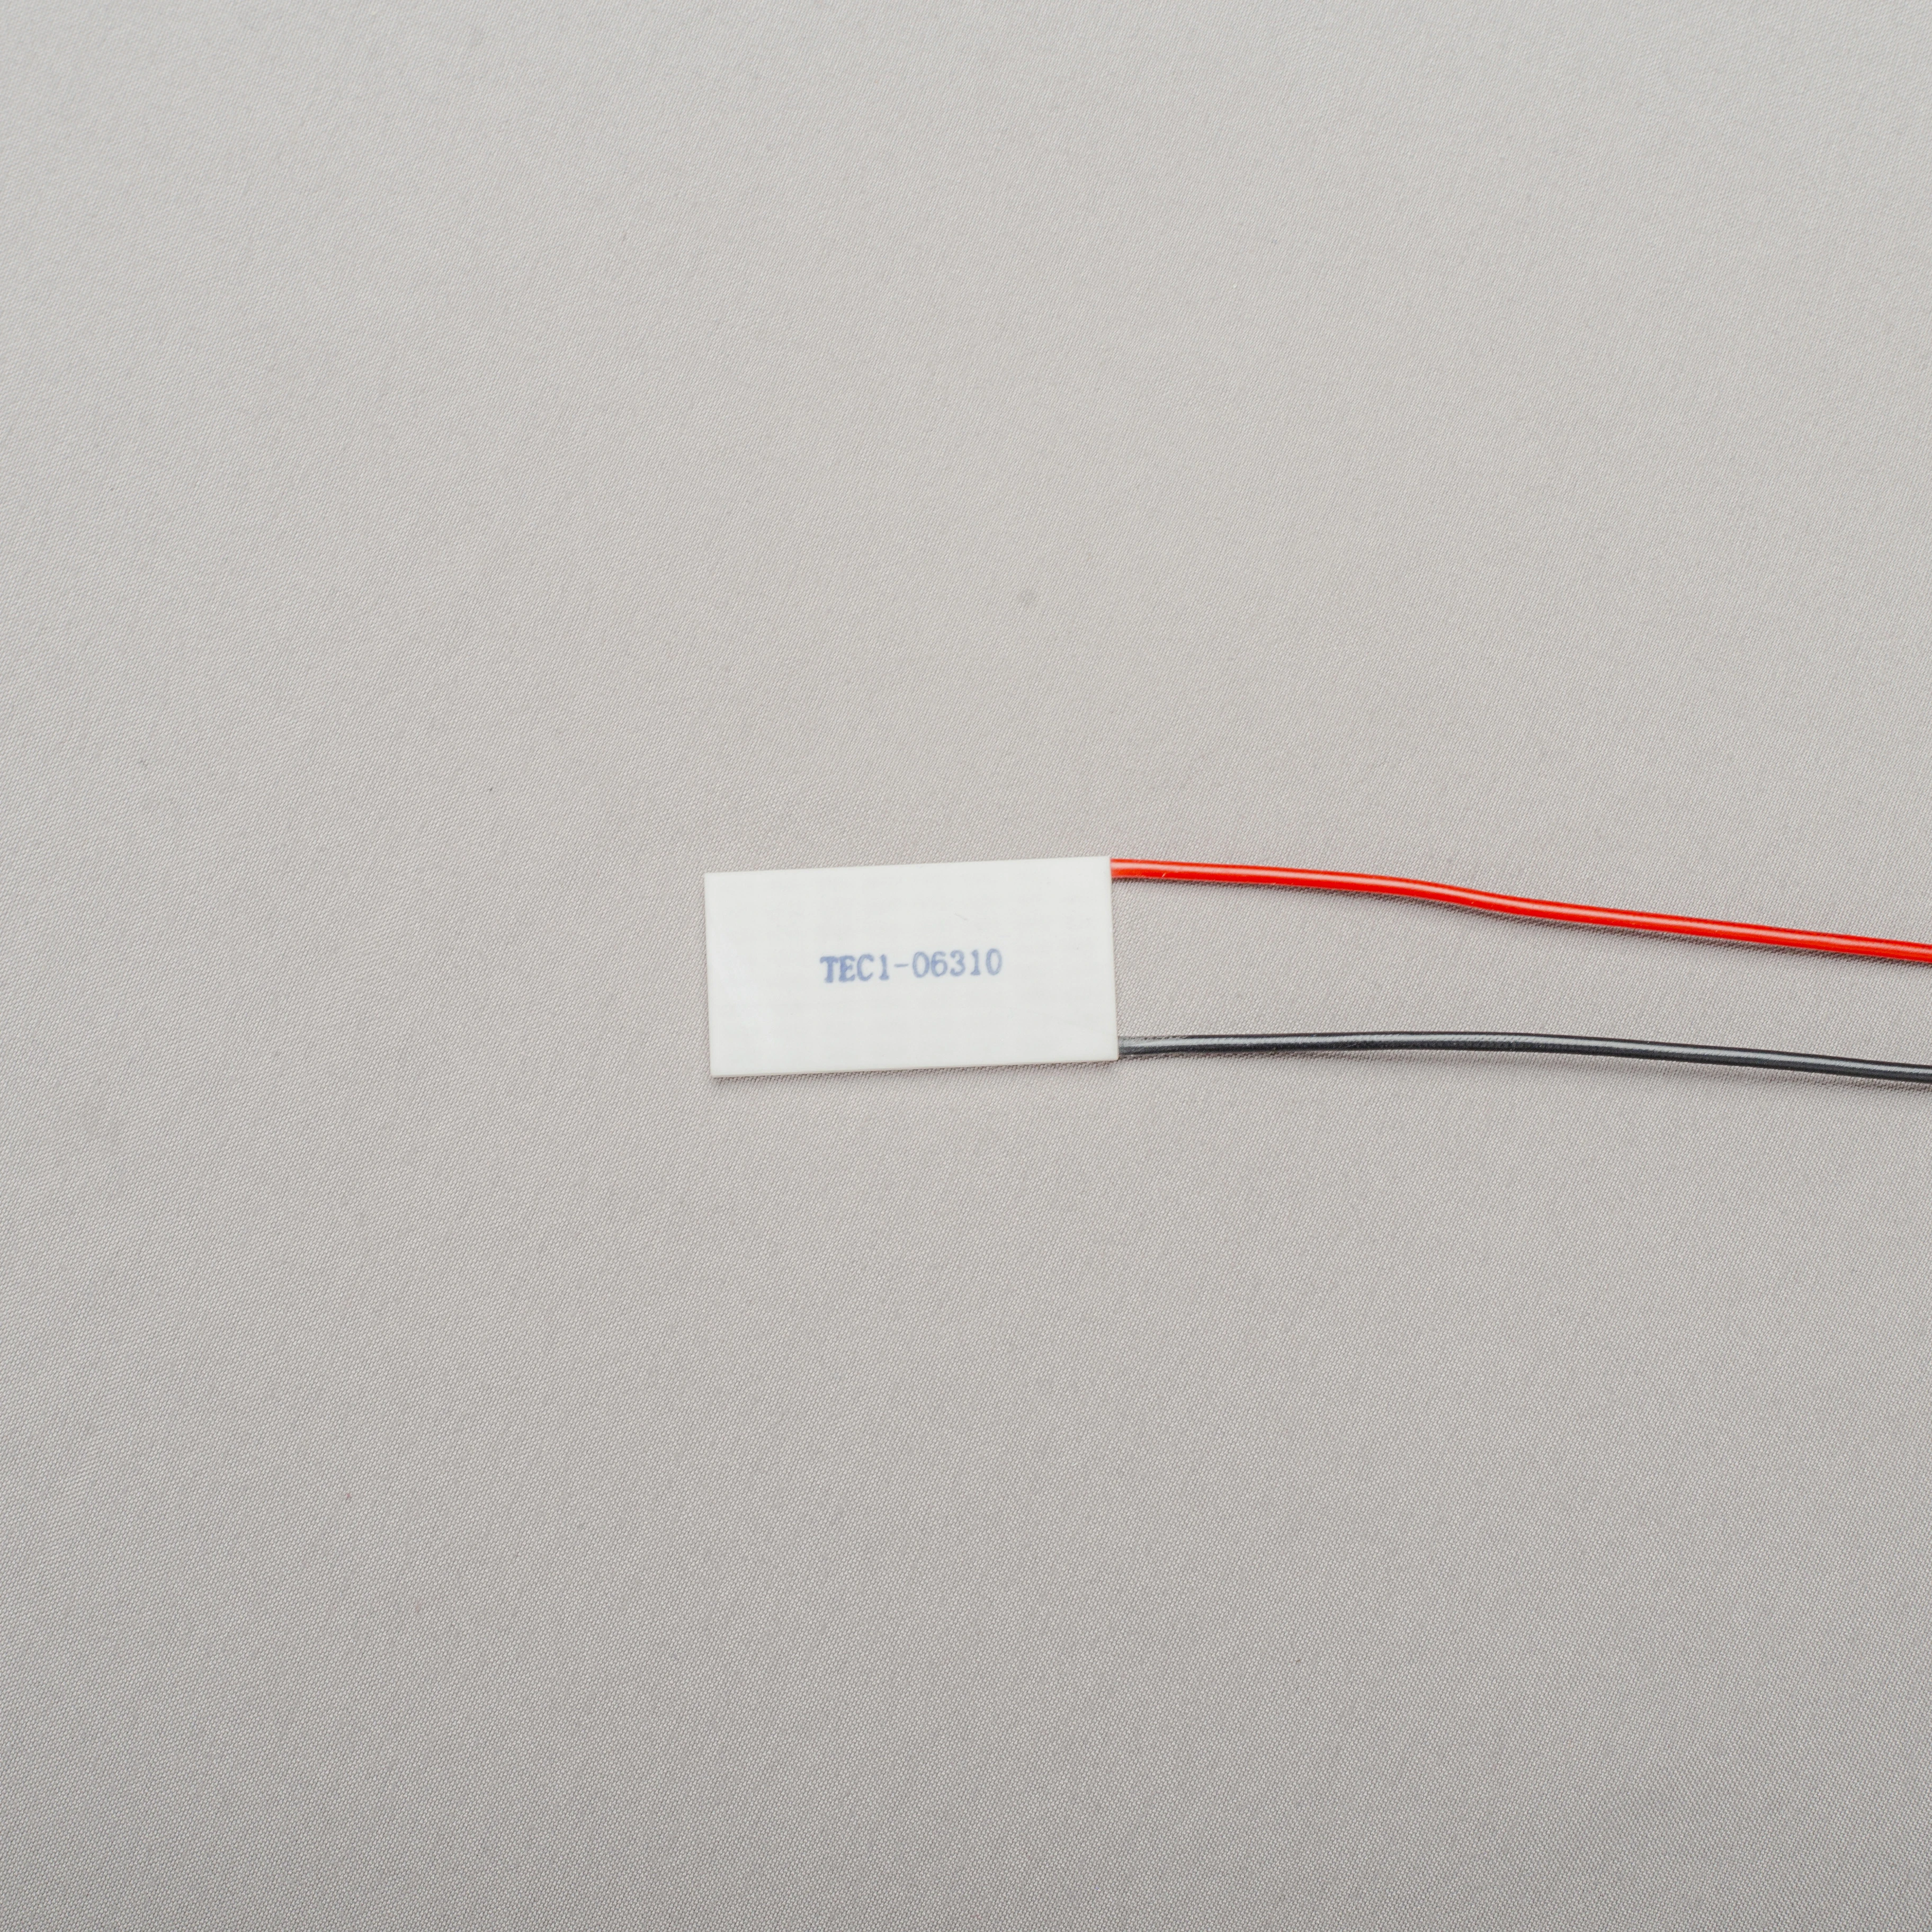 TEC1-06310  semiconductor thermoelectric heating peltier cooler module